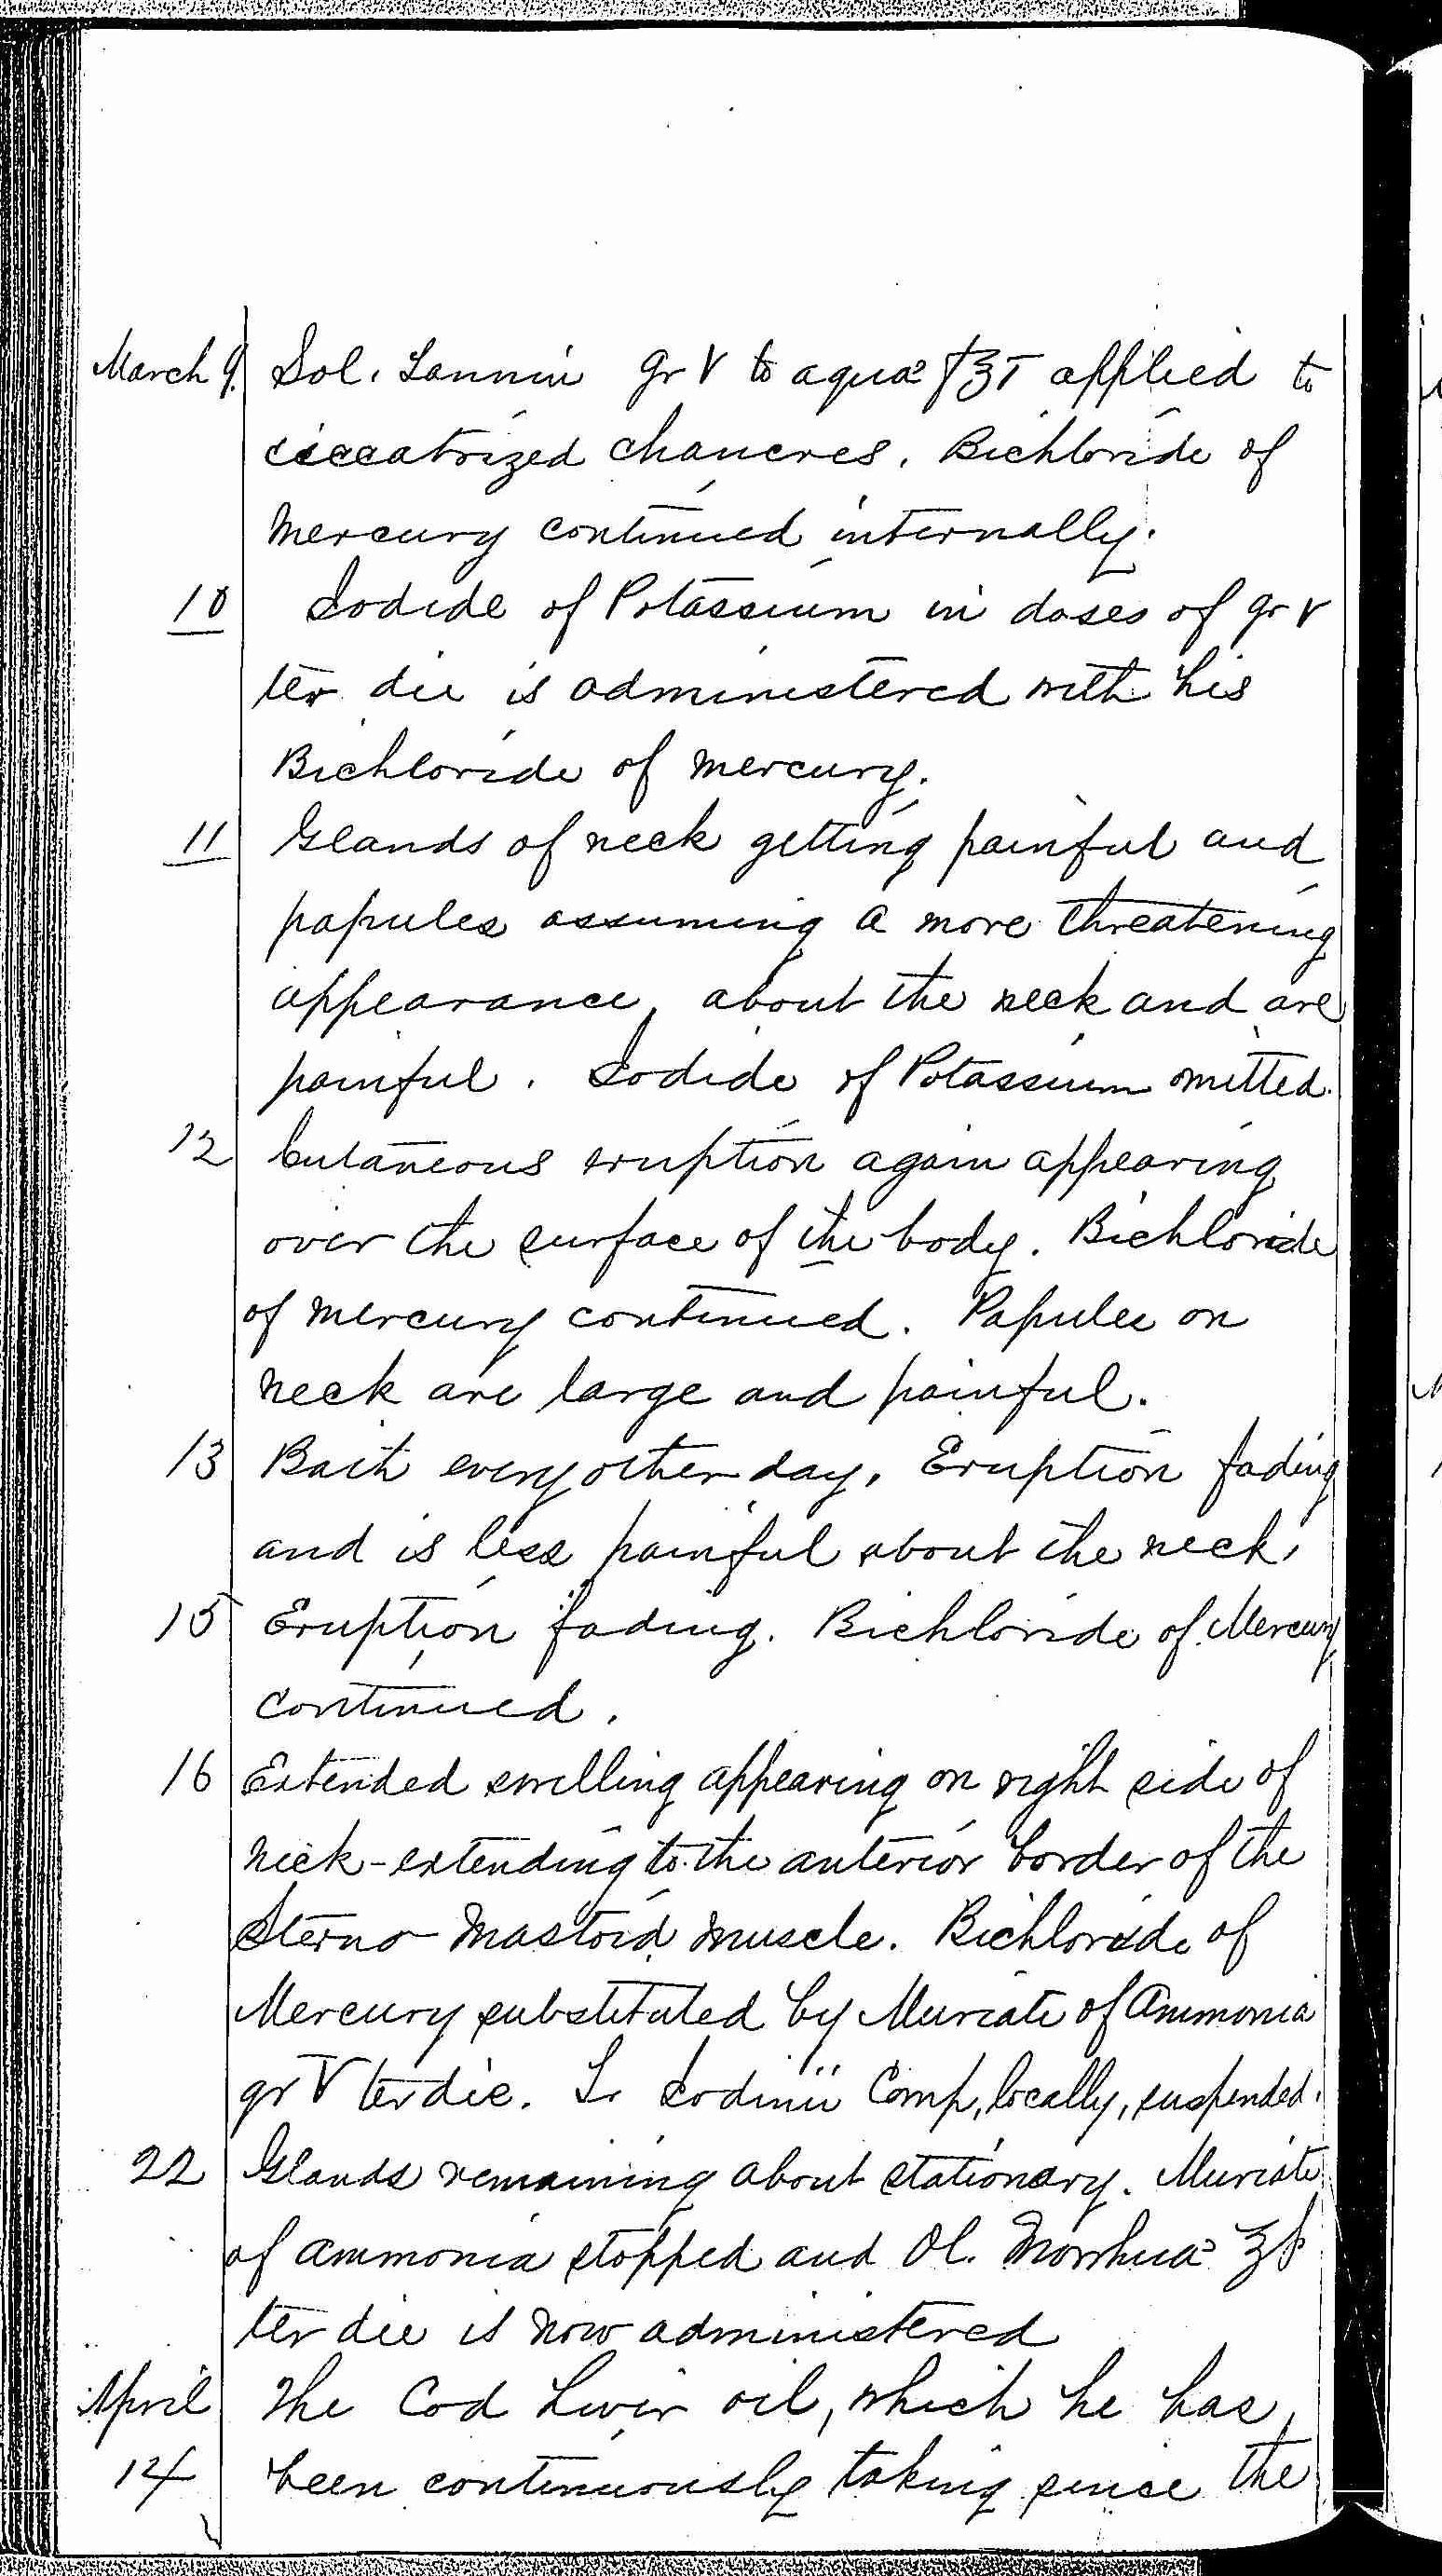 Entry for John Archer (page 4 of 5) in the log Hospital Tickets and Case Papers - Naval Hospital - Washington, D.C. - 1868-69